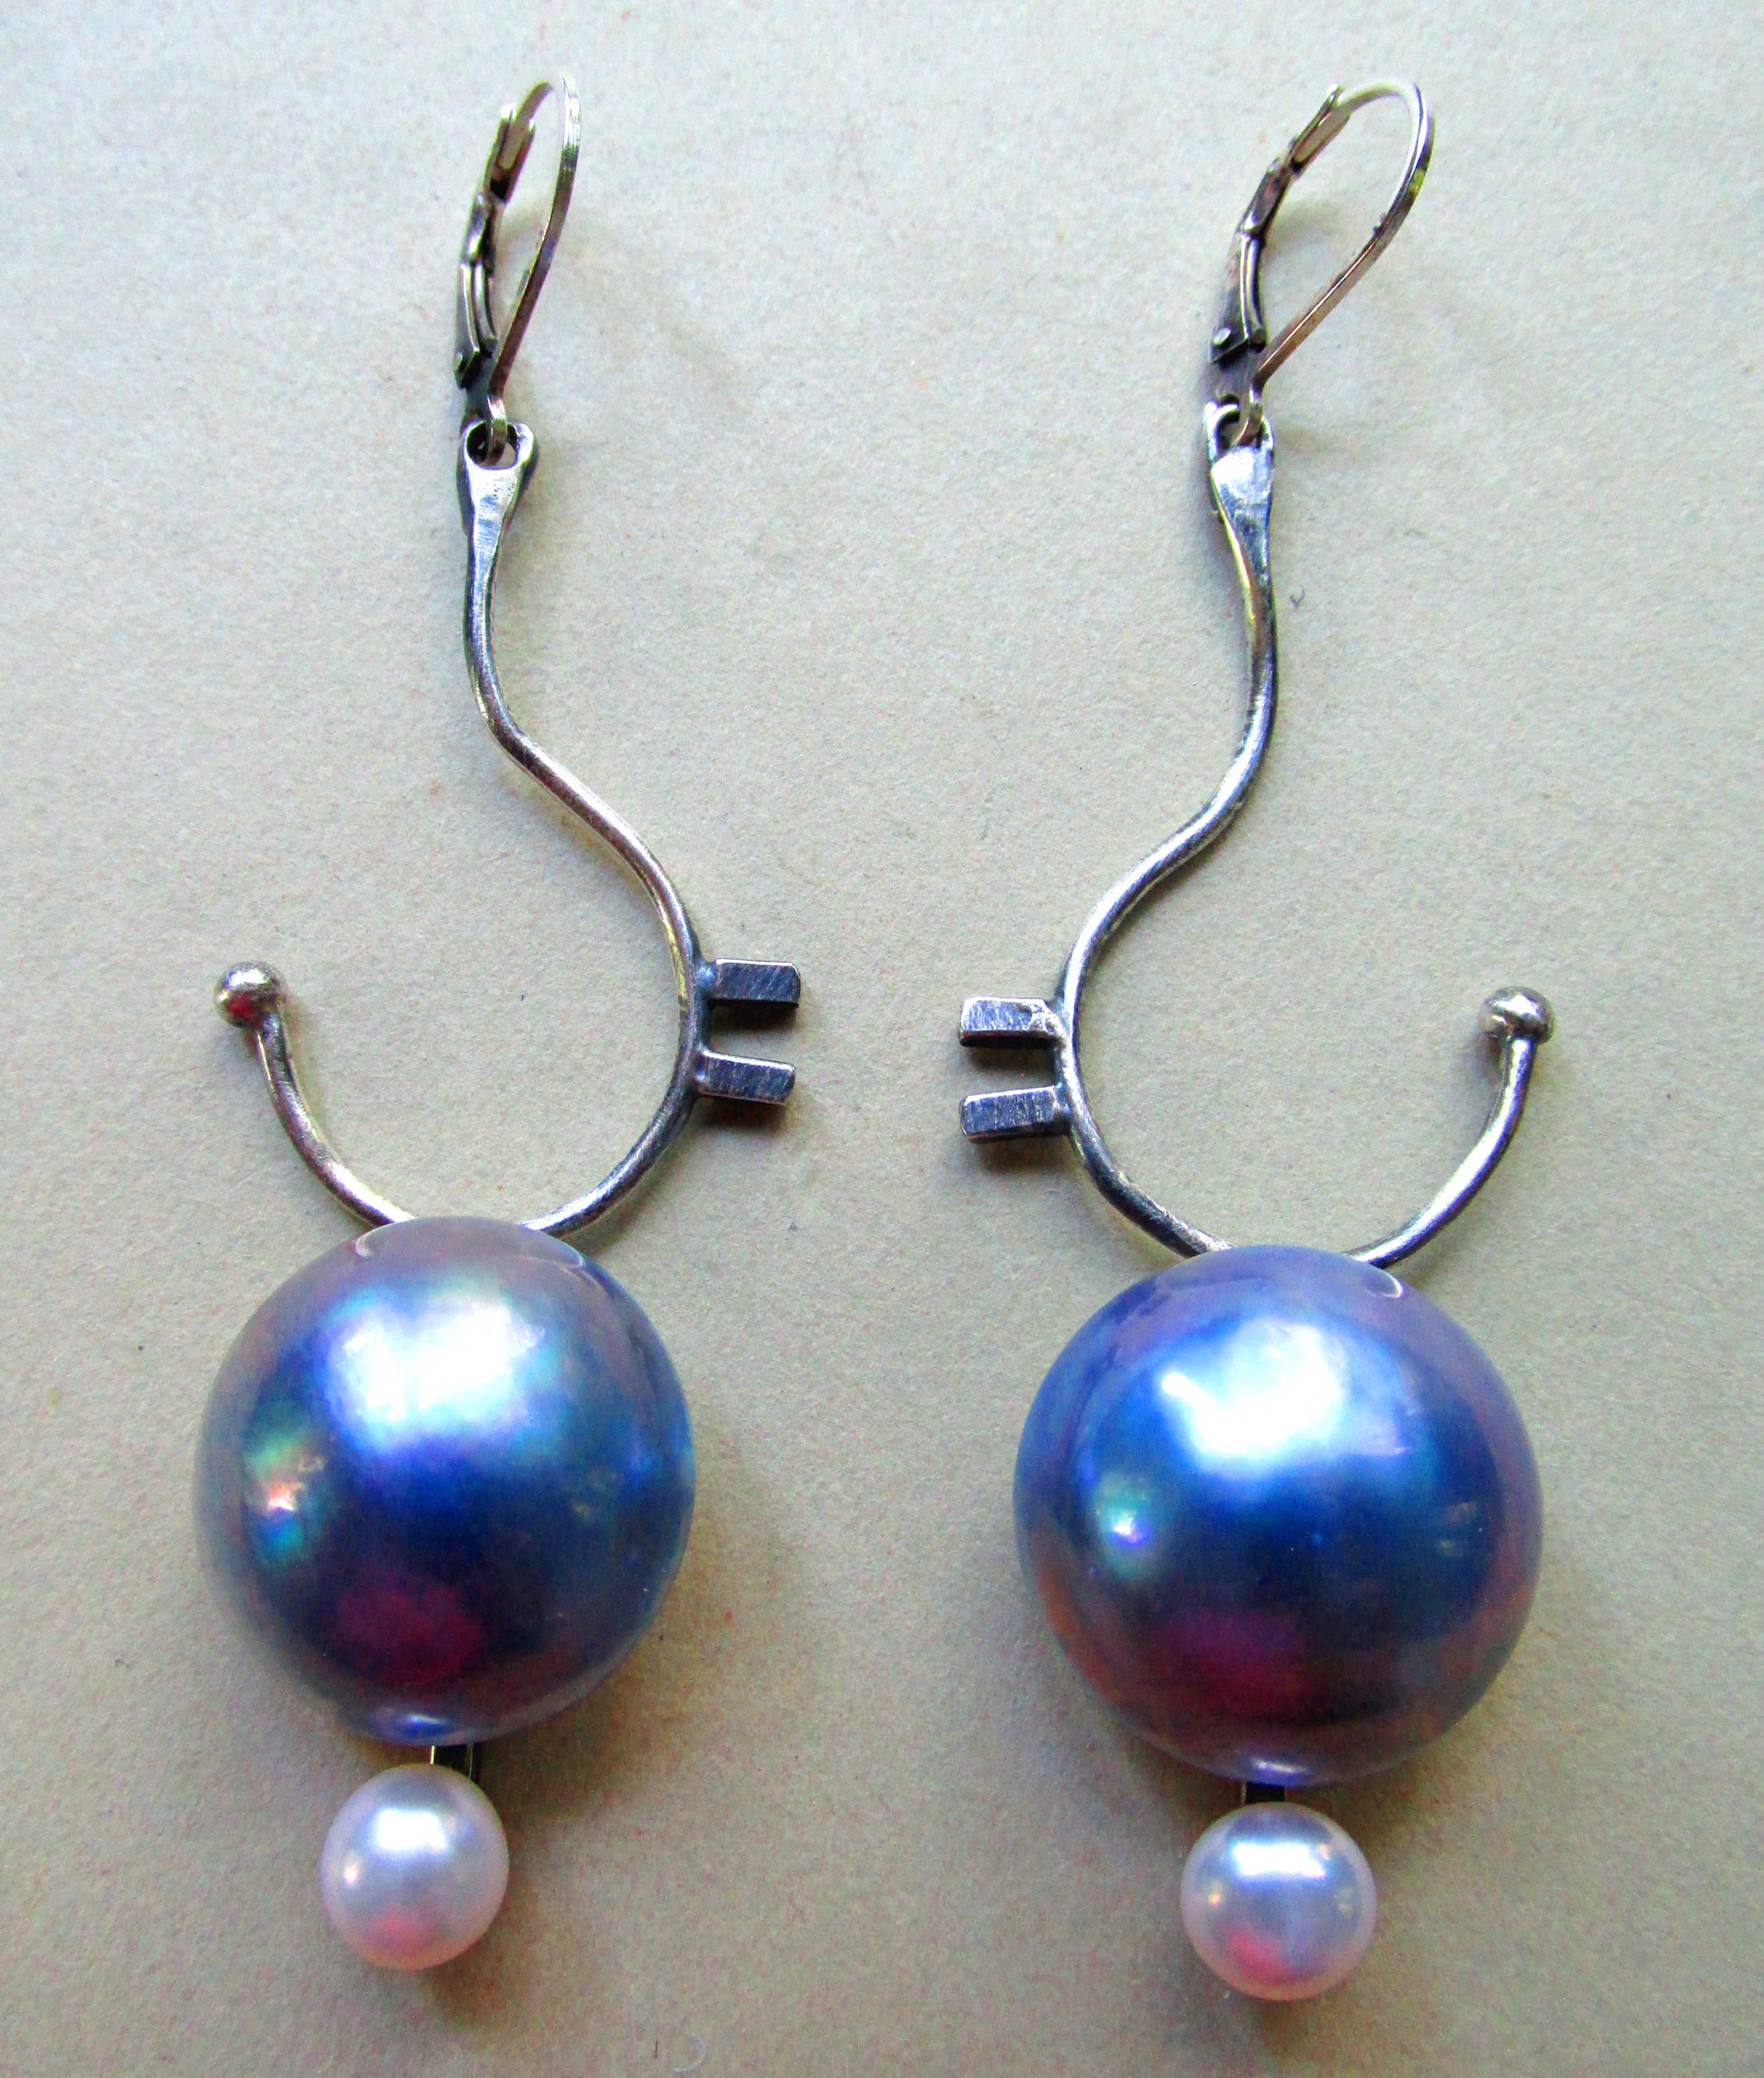 Pearls and Sterling Silver Earrings by Anne Rob